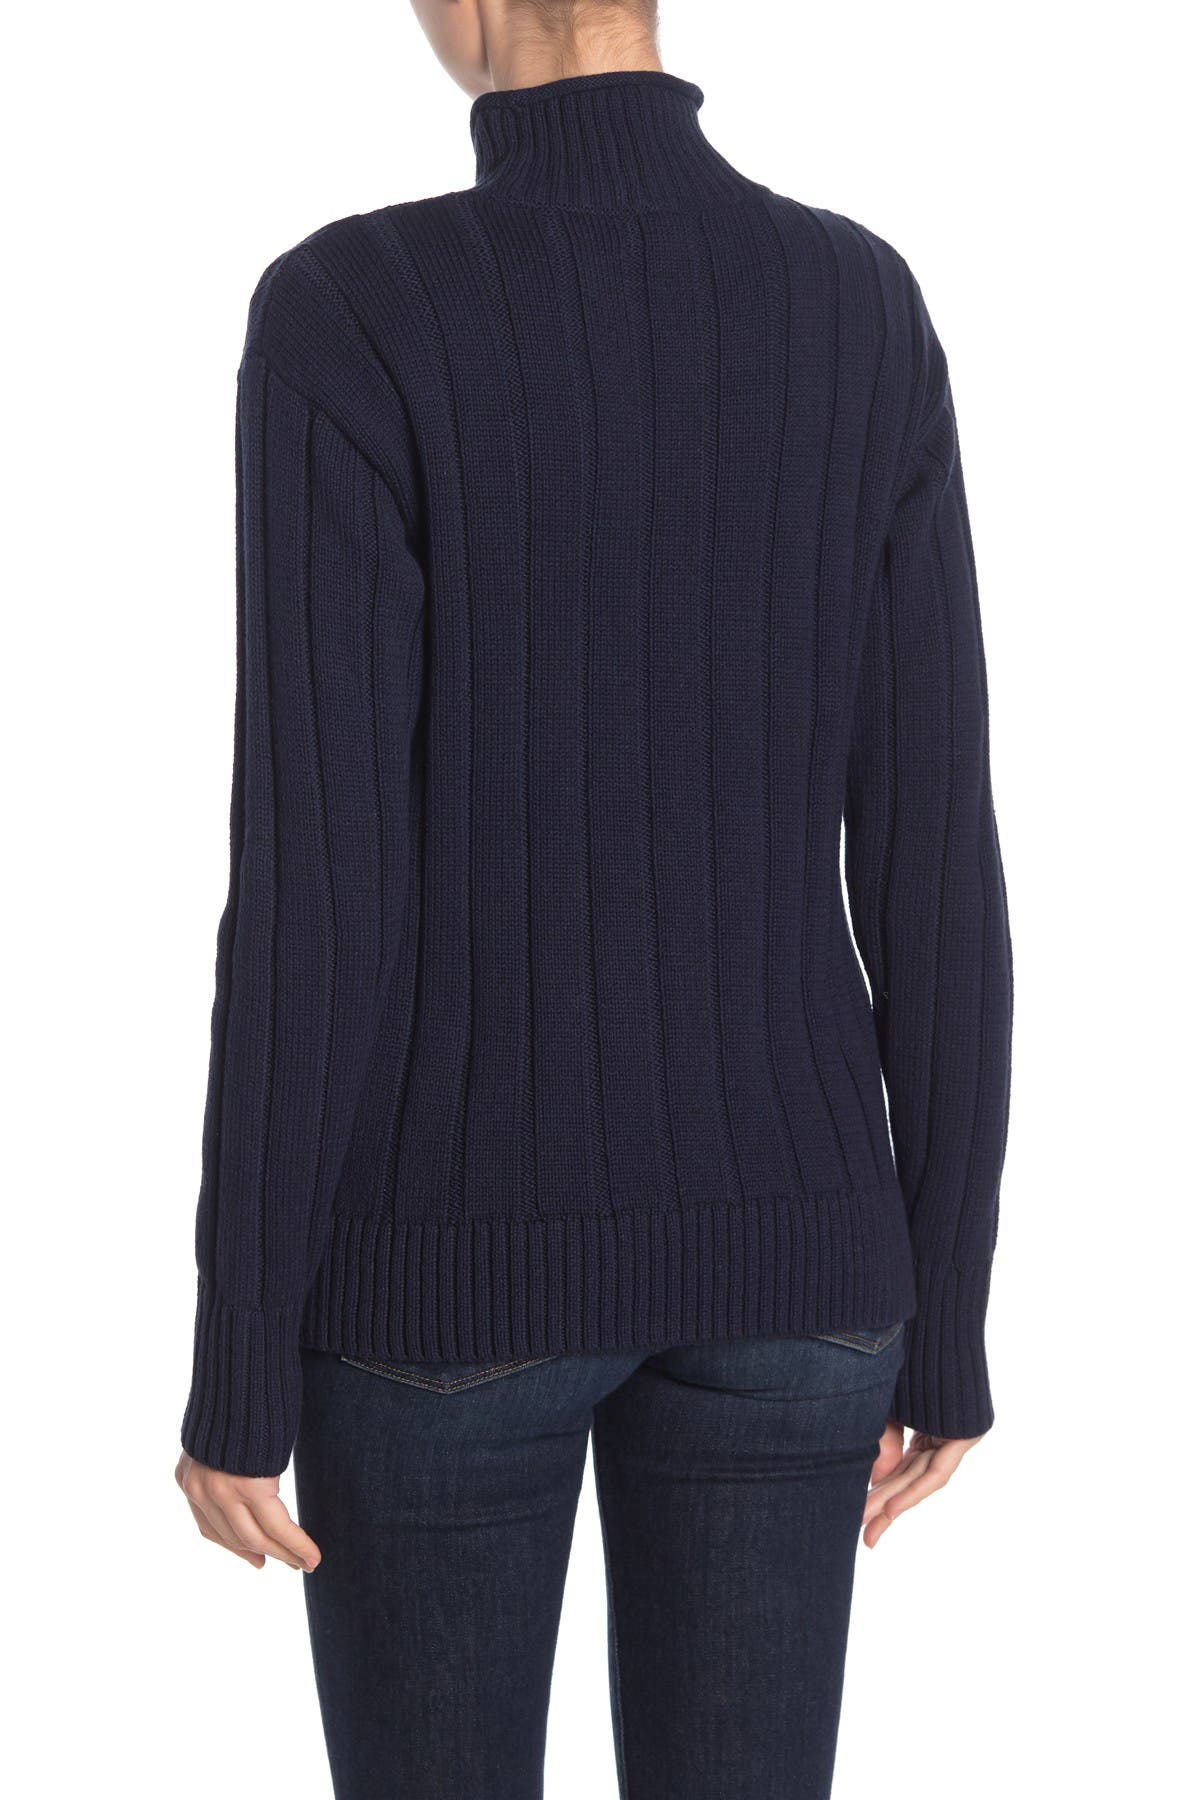 J. Crew | Mock Neck Cable Knit Sweater | Nordstrom Rack